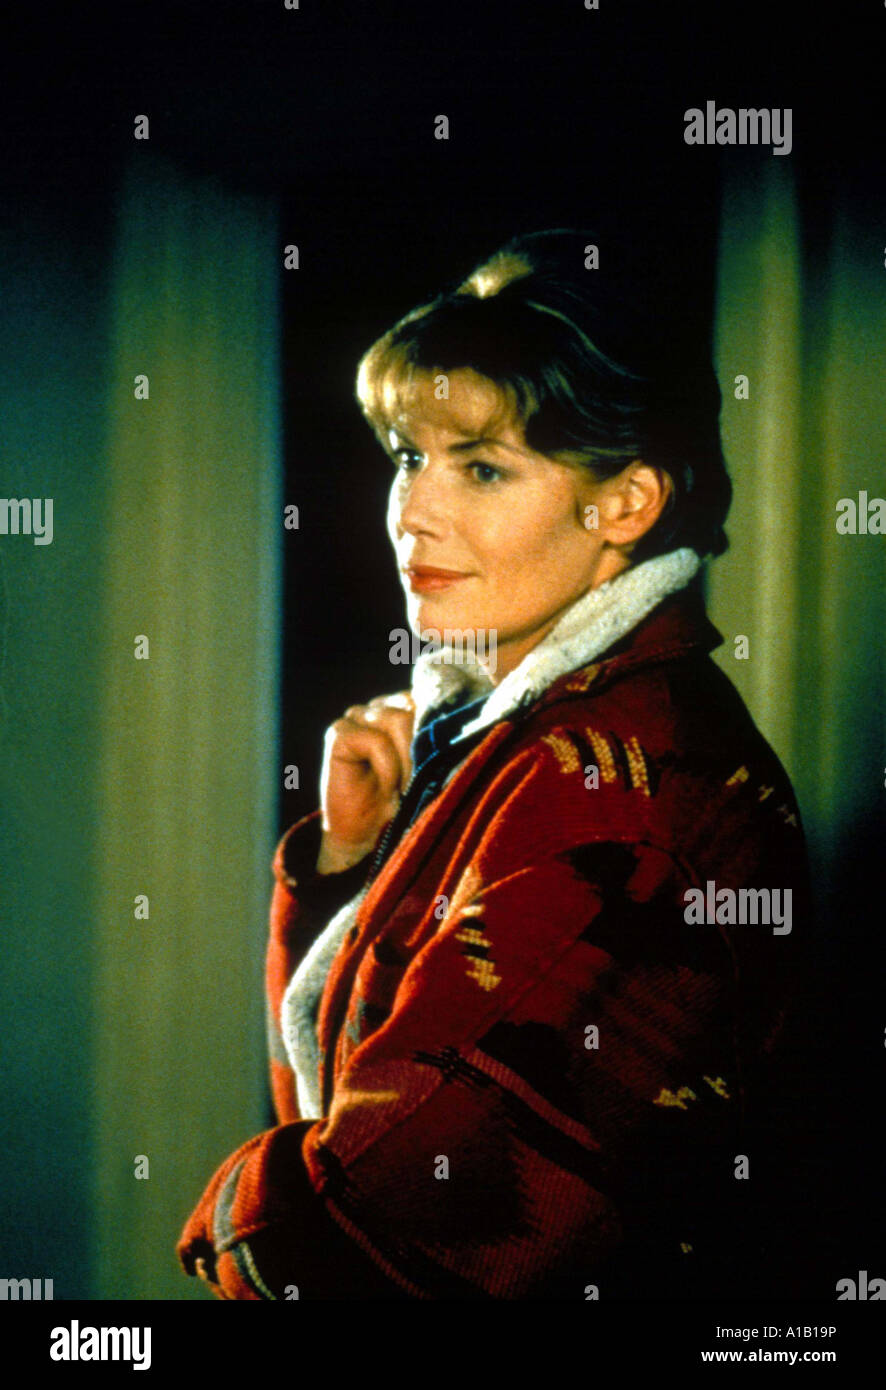 At First Sight Year 1999 Director Irwin Winkler Kelly McGillis Stock Photo